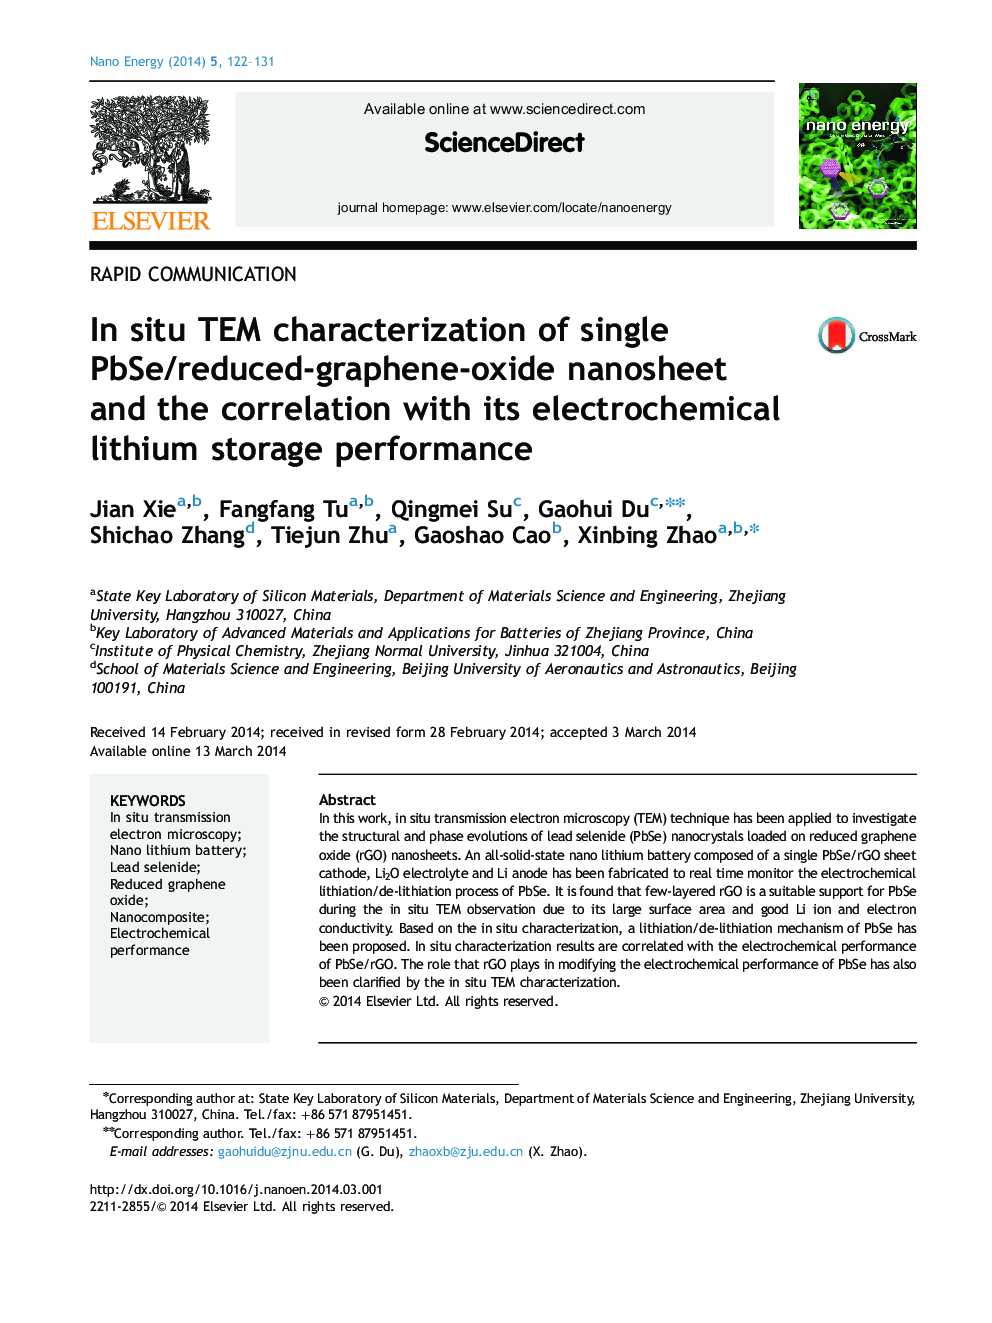 In situ TEM characterization of single PbSe/reduced-graphene-oxide nanosheet and the correlation with its electrochemical lithium storage performance